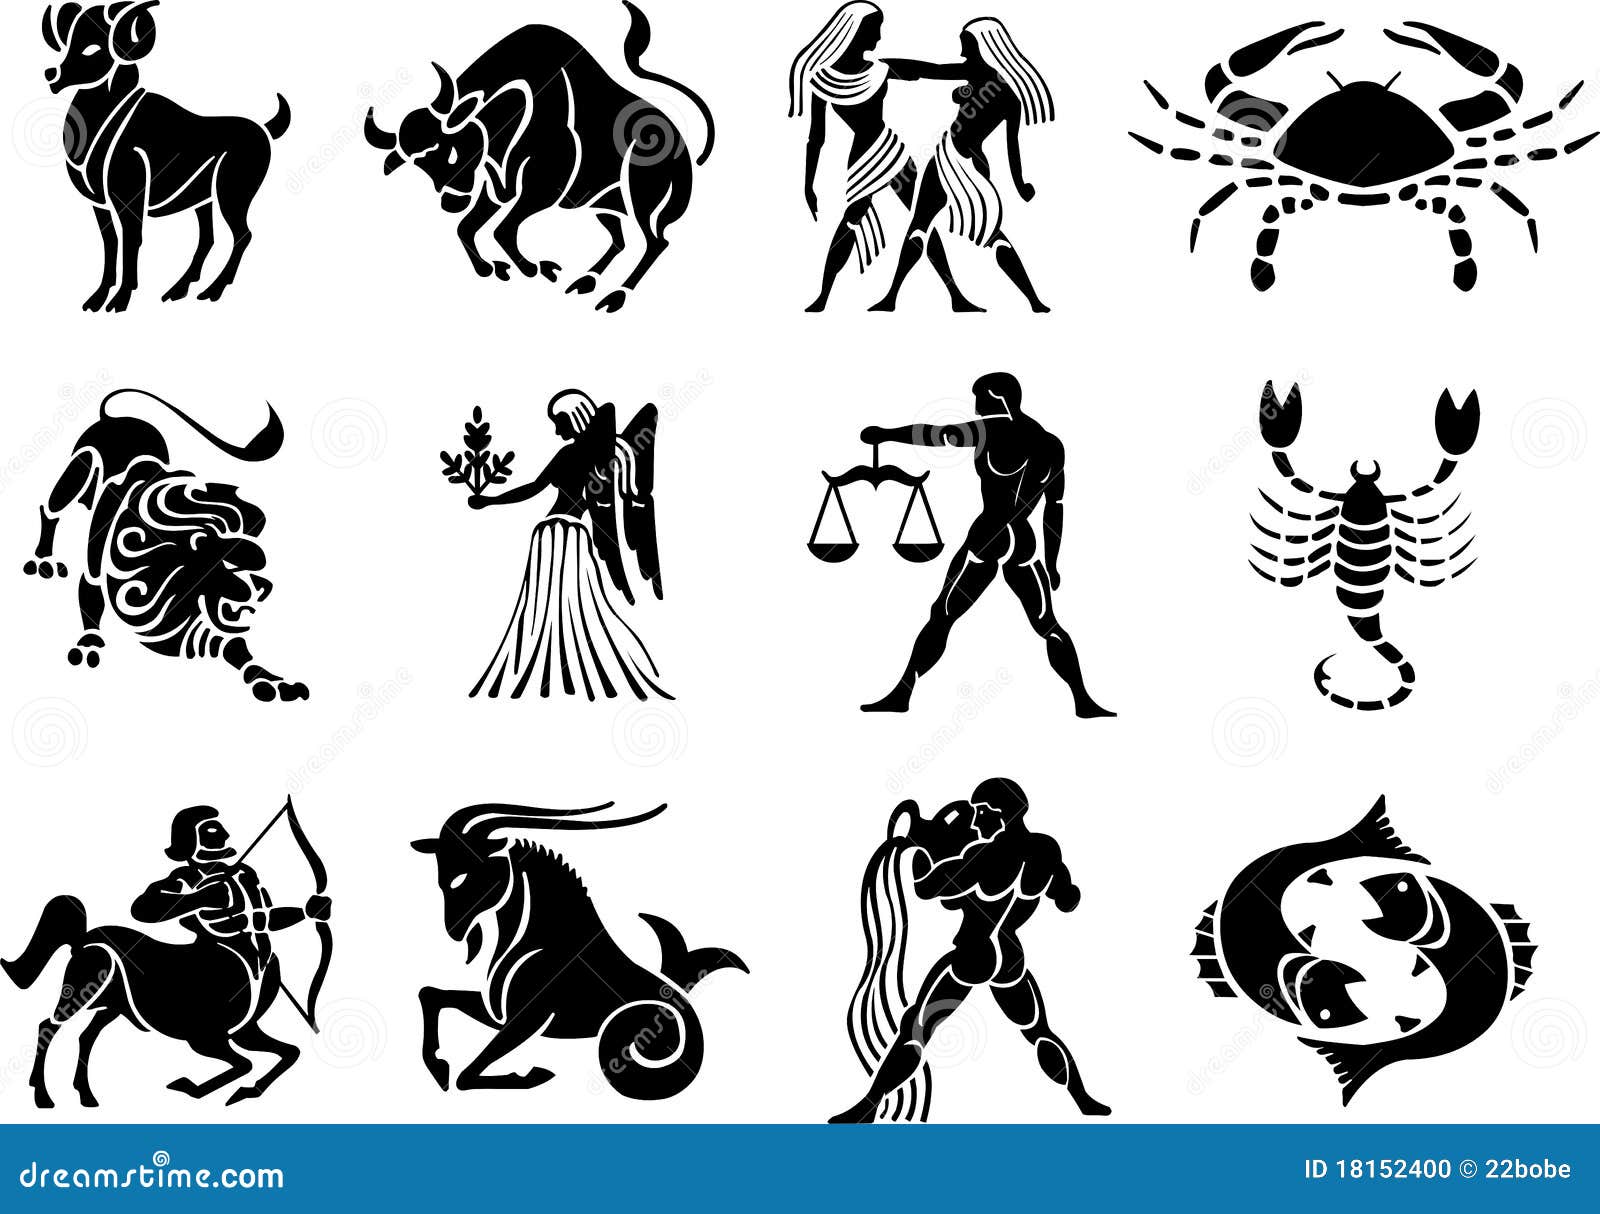 star sign clipart images